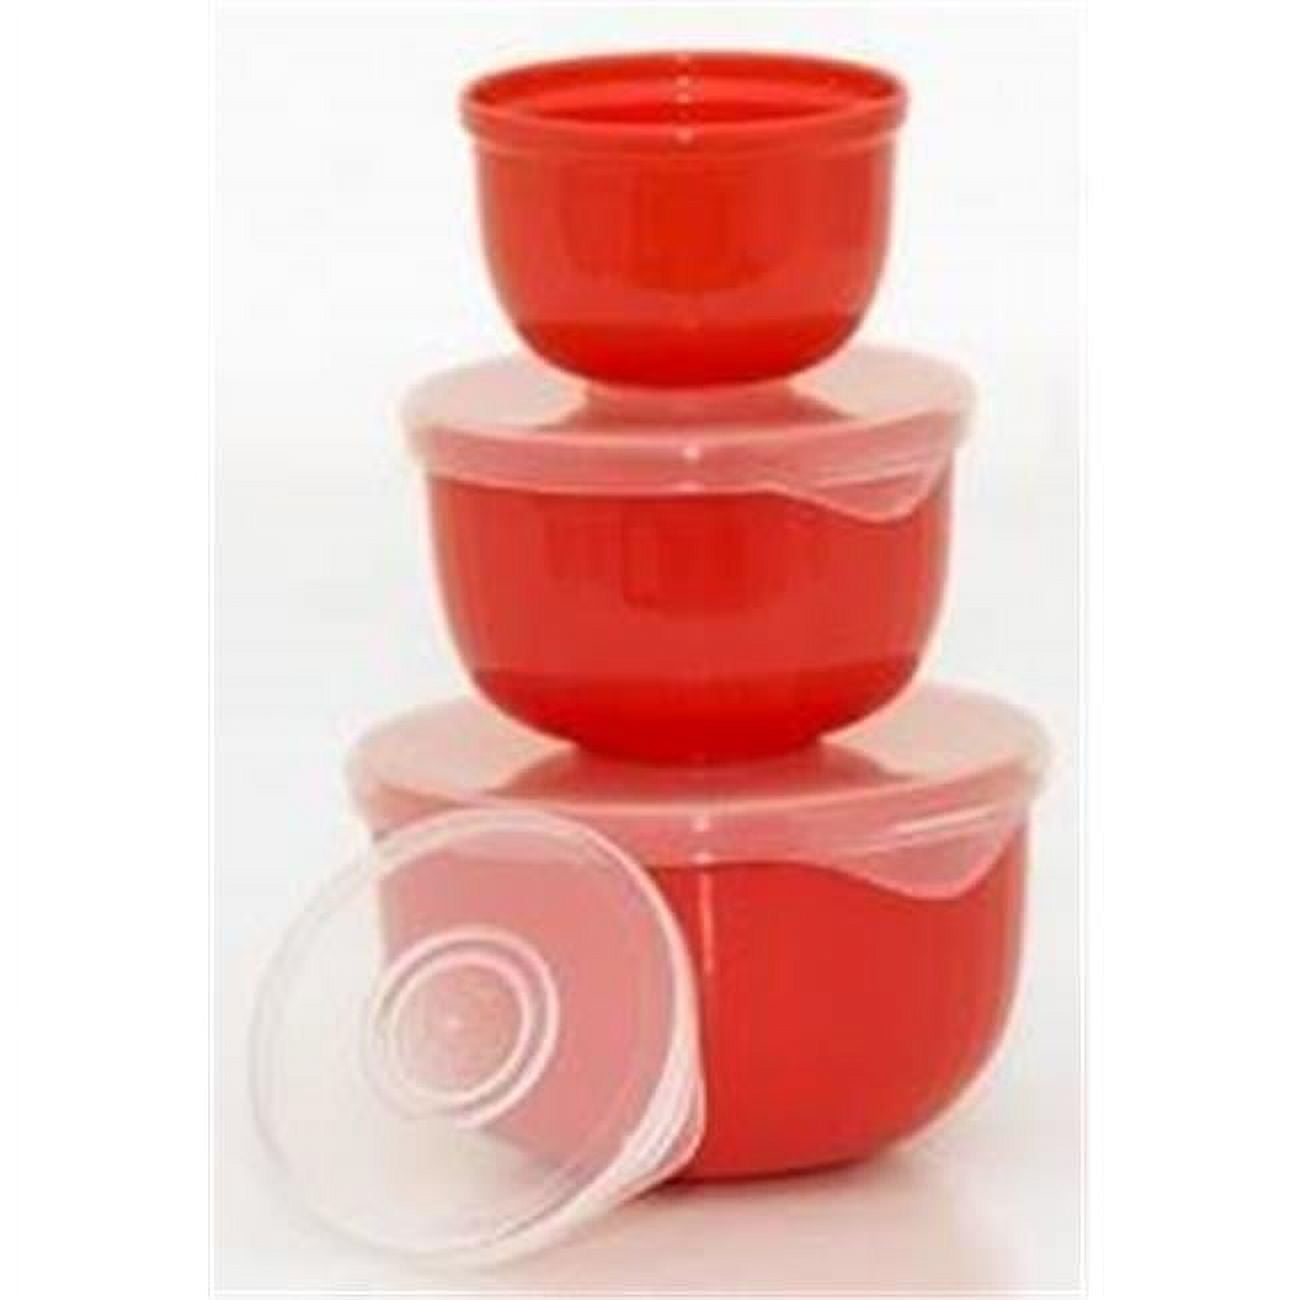 PrepEase Prep Bowl Set with Lids - Made in USA